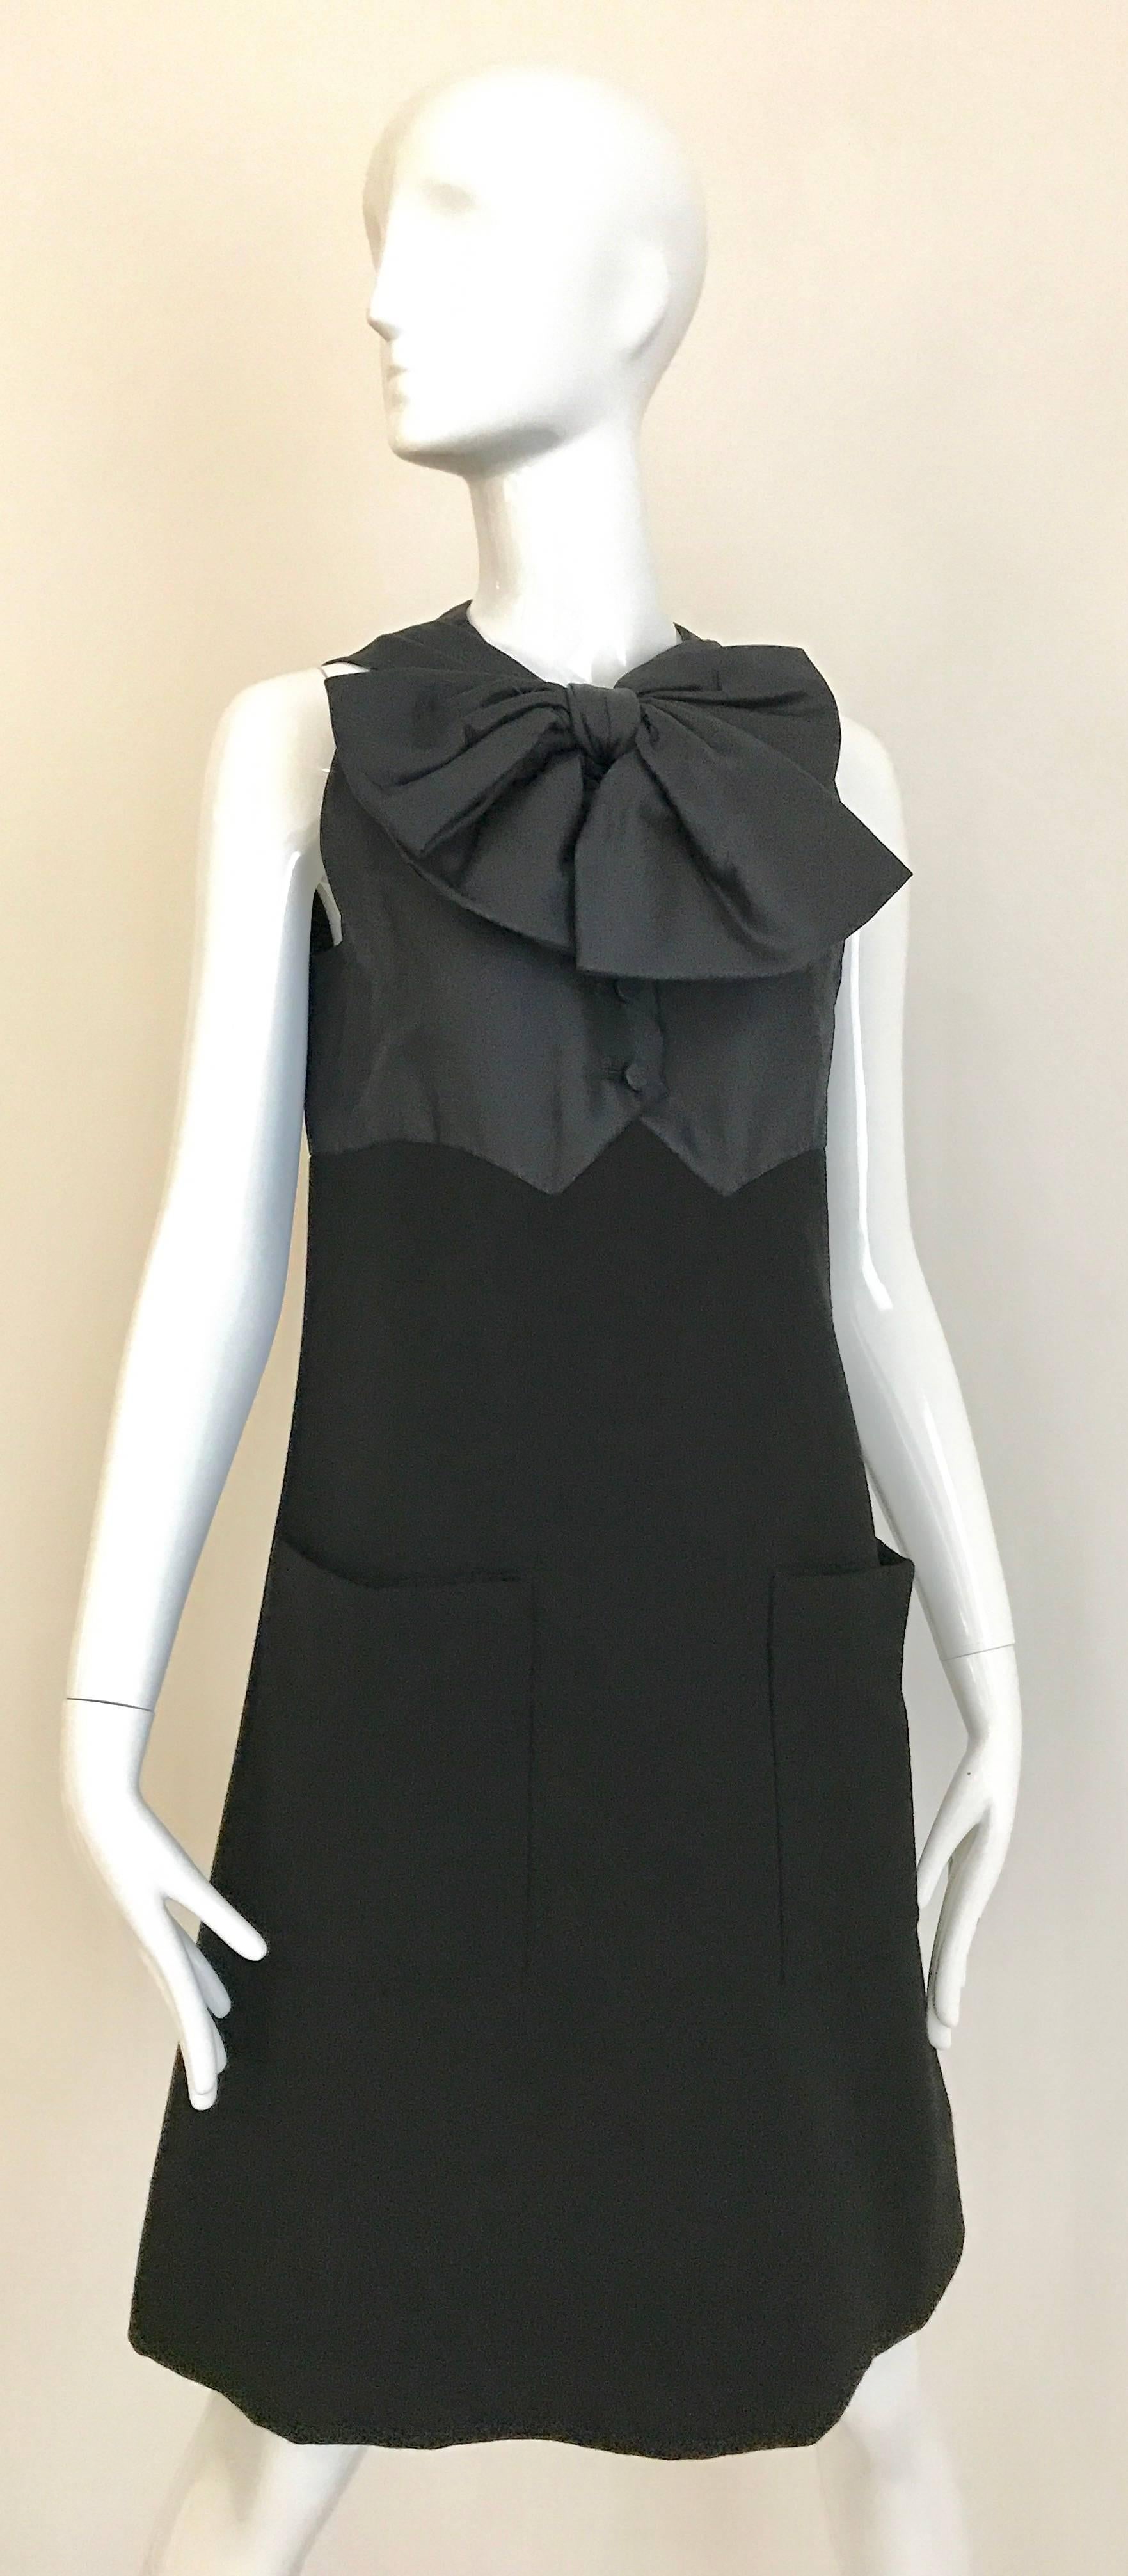 1960s Geoffrey Beene  black sleeveless silk and crepe dress with bow and large two pockets with slightly A line skirt.
Bust: 36 inch / Waist:  34 inch / Hip: 38 inch/ Dress length: 38 inch
Fit modern size 6 / Medium
**** This Garment has been